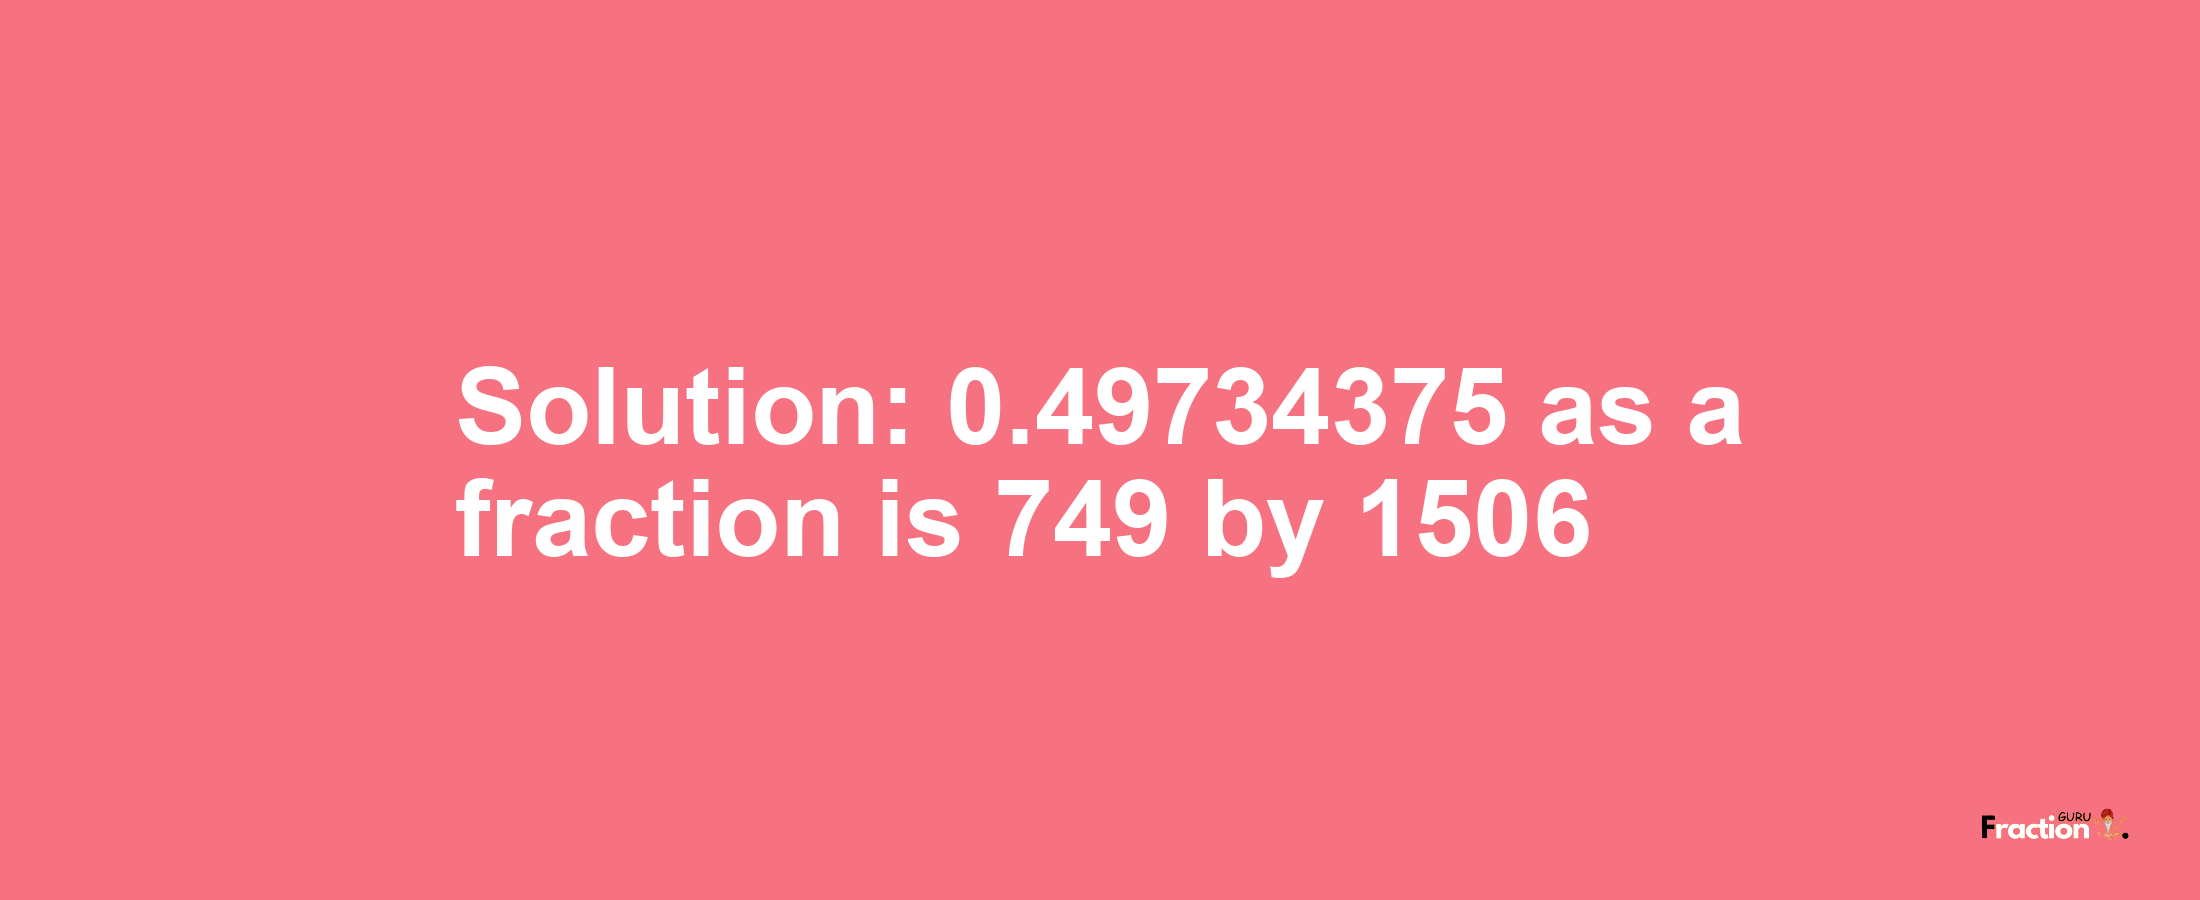 Solution:0.49734375 as a fraction is 749/1506